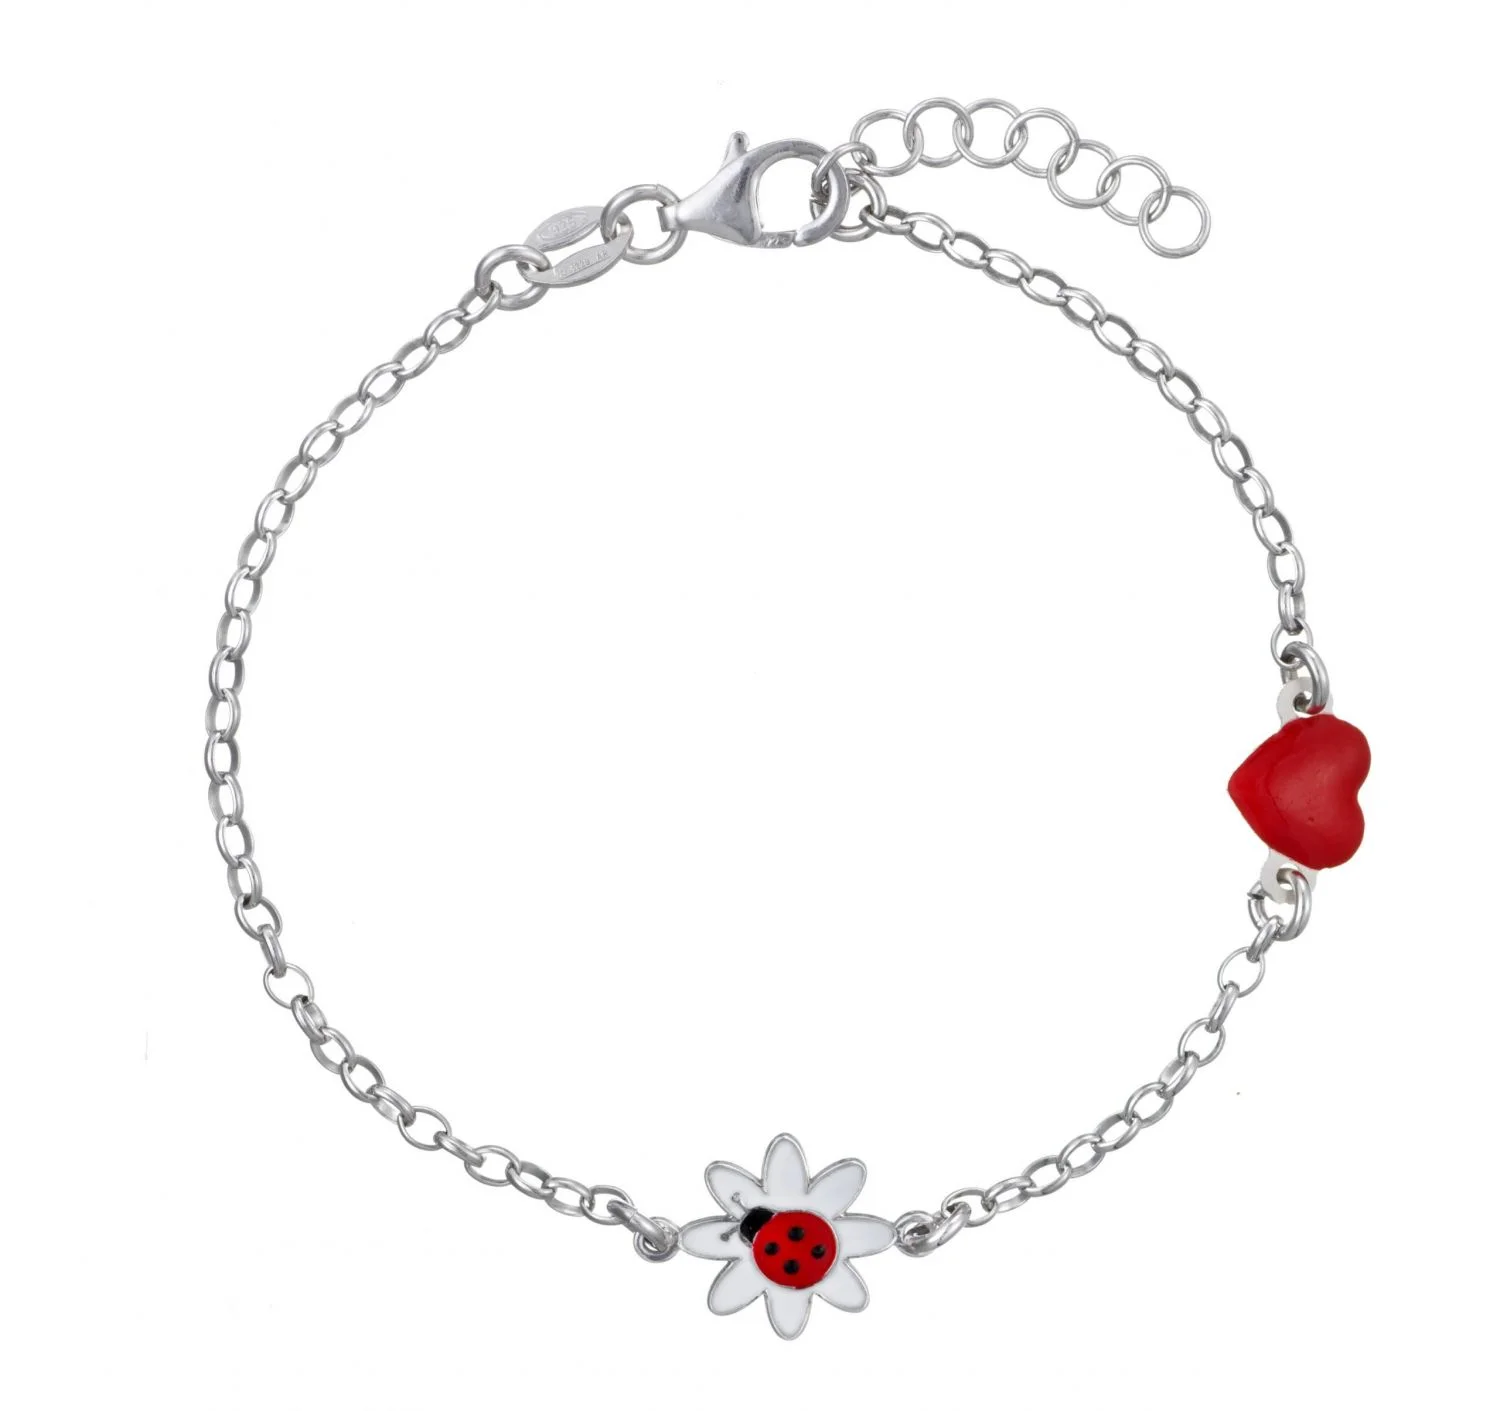 120156 Chimiama Kids Bracciale Bambina Argento Cuore - Stainless Gioiellerie